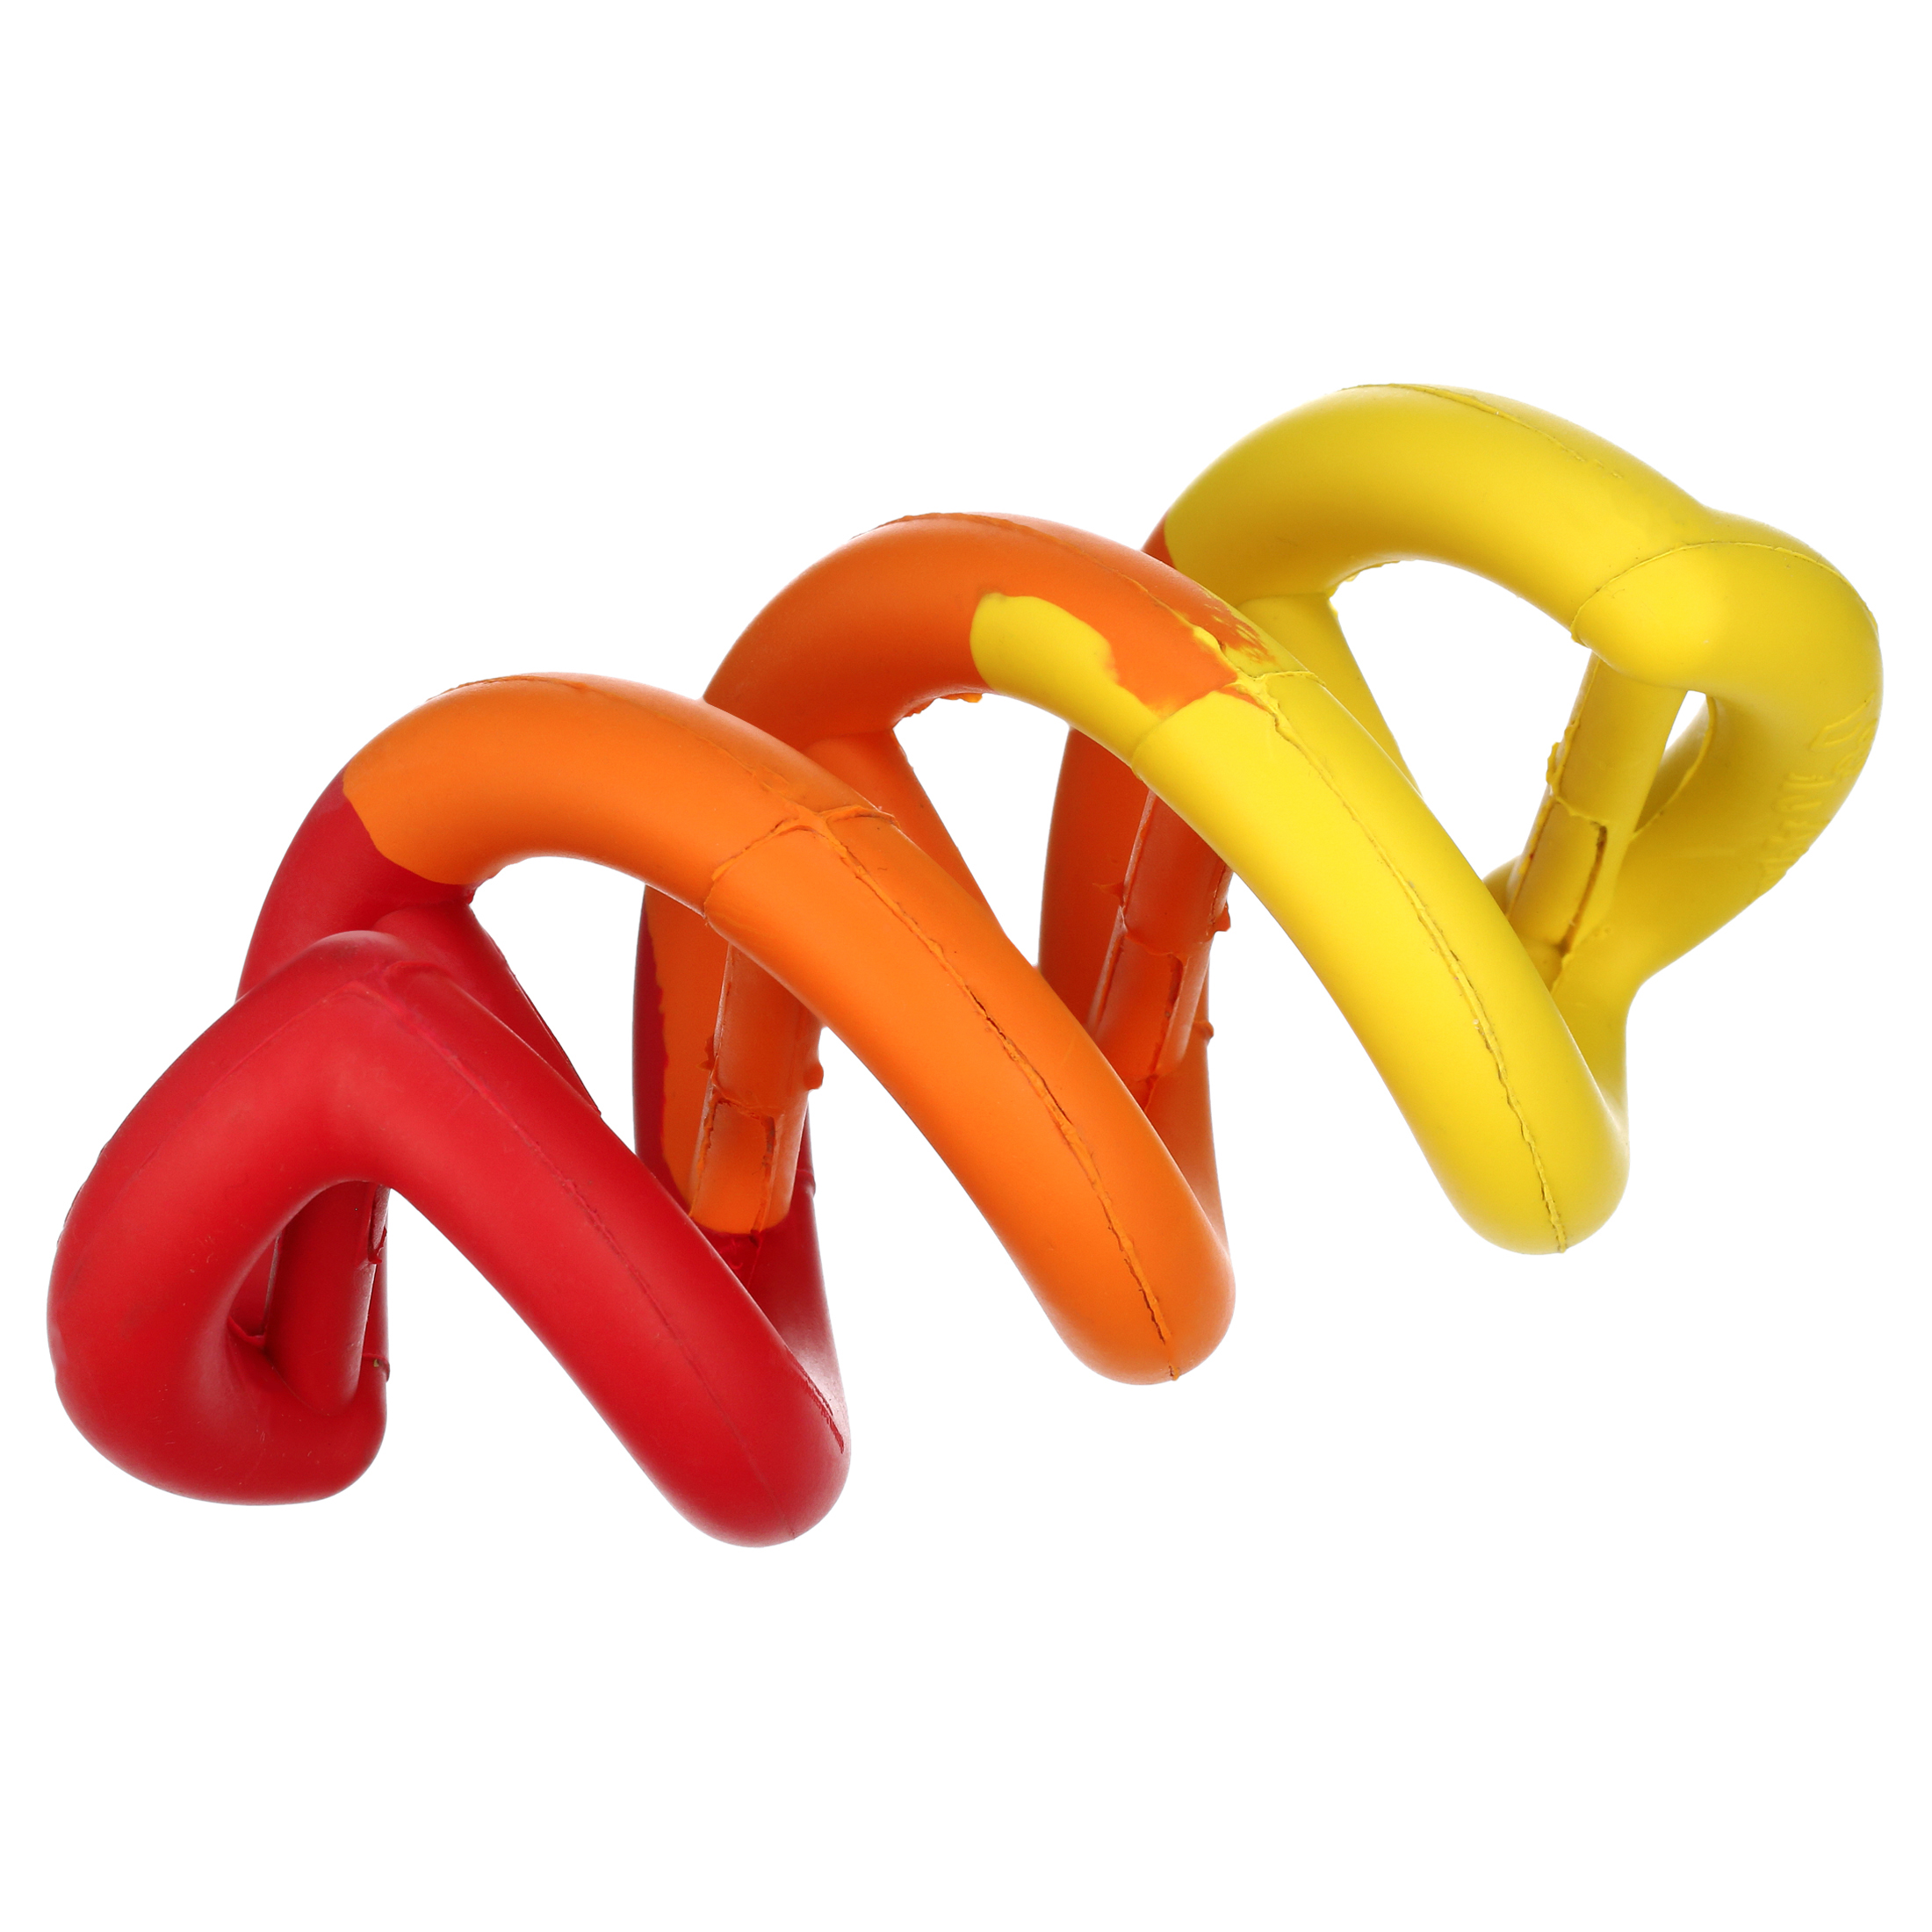 JW Dogs in Action Double Helix Shaped Rubber Chew and Tug Dog Toy, Multicolor, Large, Pack of 1 - image 3 of 5